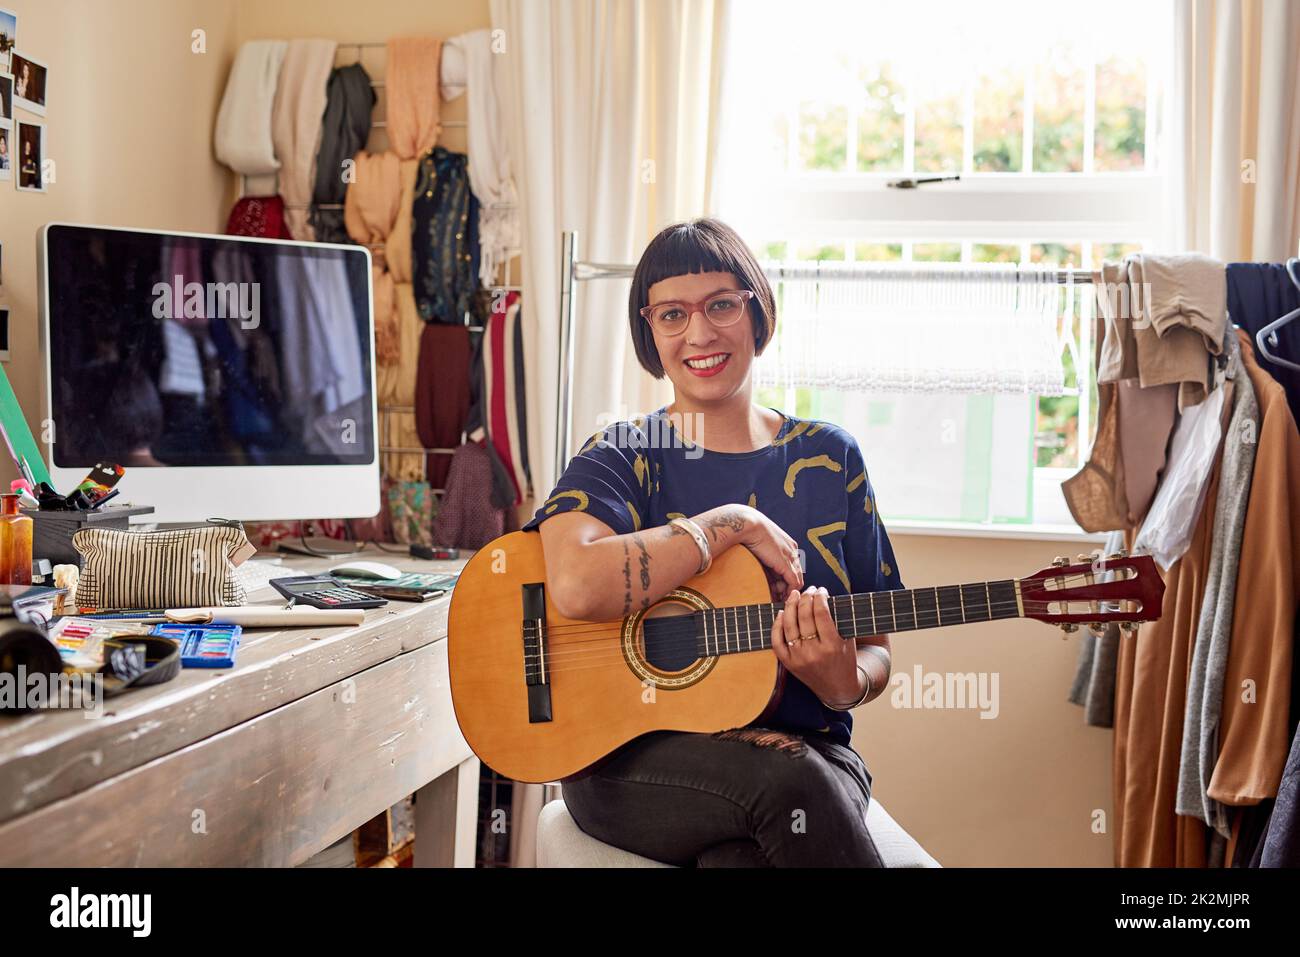 She has music in her soul. Portrait of a stylish young woman sitting in her eclectic toom playing a guitar. Stock Photo